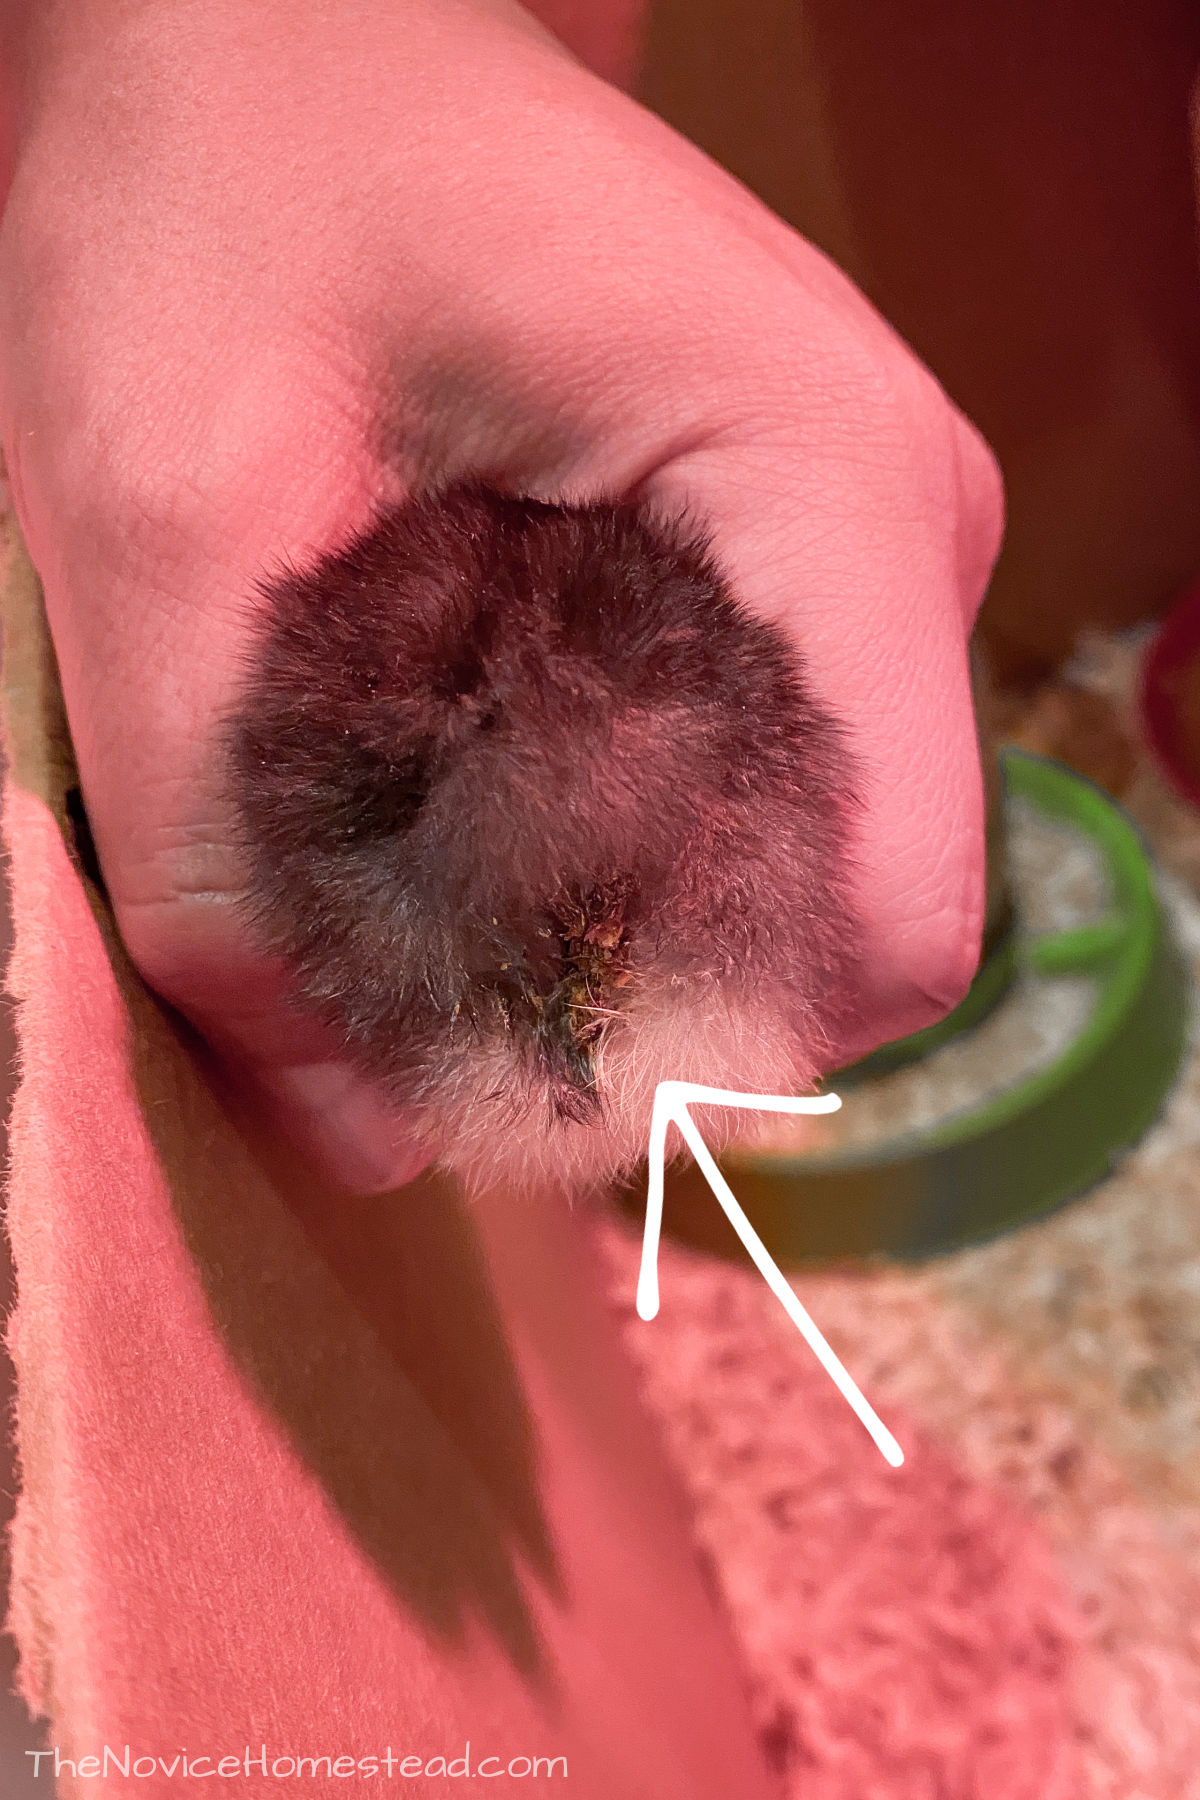 holding a baby chick up to show pasty butt on its backside